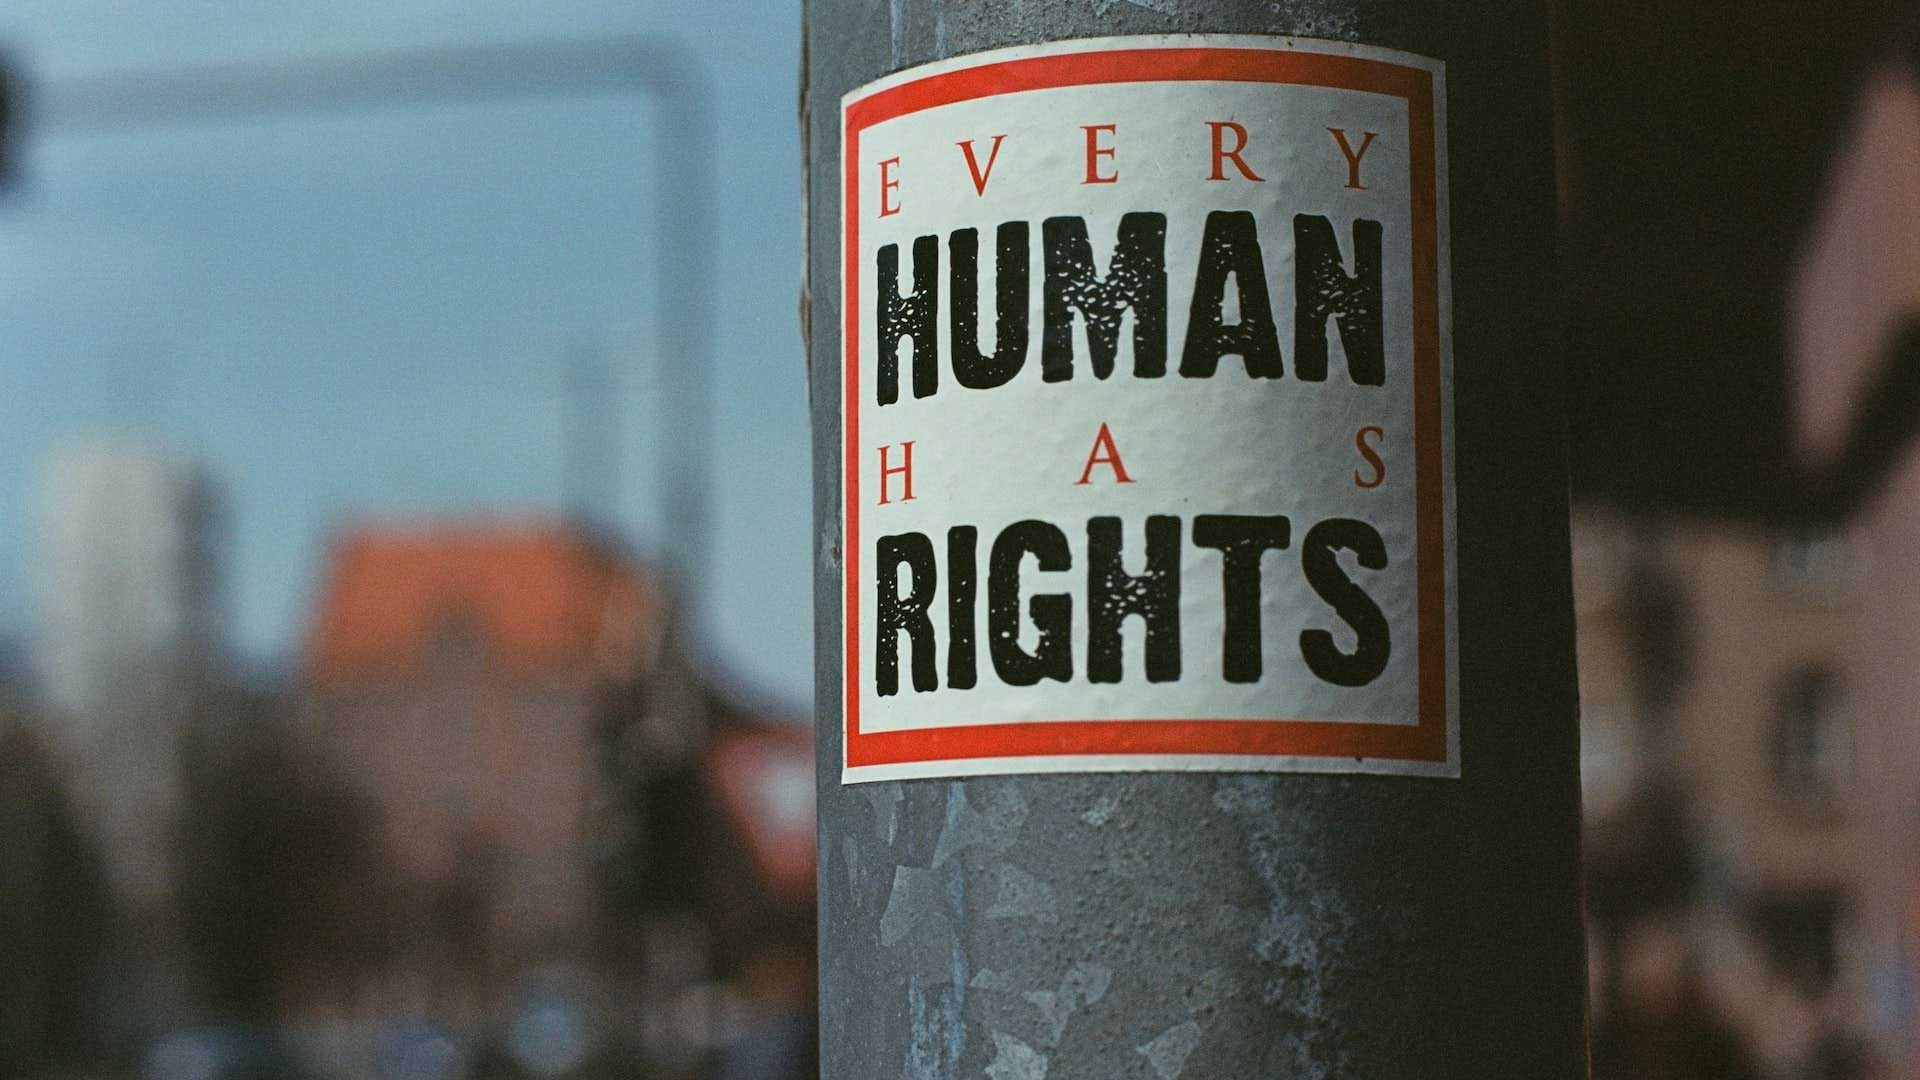 An image of a lamppost with a sticker on it, saying "Every Human Has Rights"